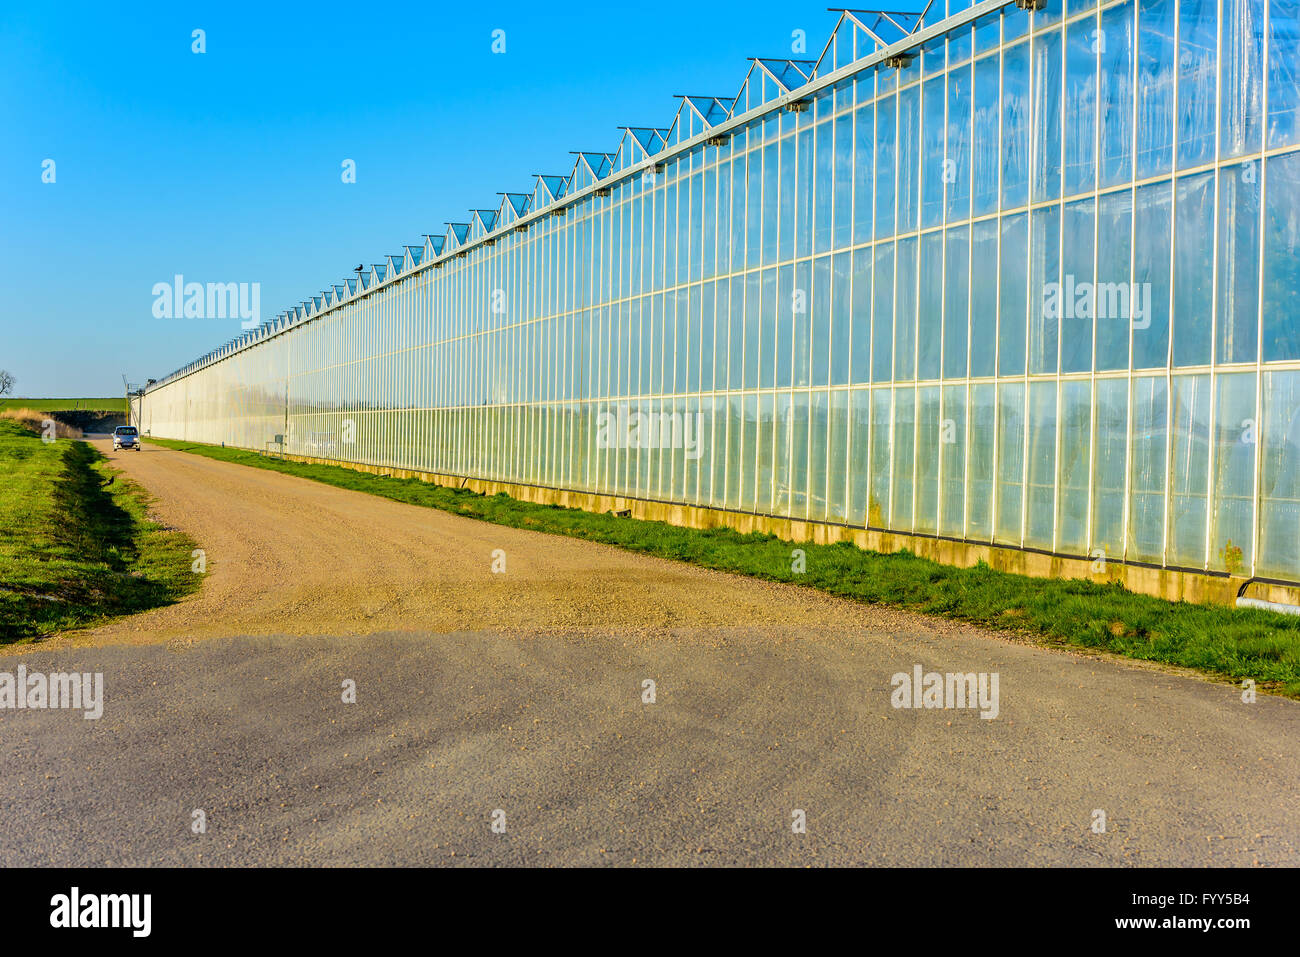 The evening sunshine is making this greenhouse glow with a golden shimmer against a blue sky. Stock Photo